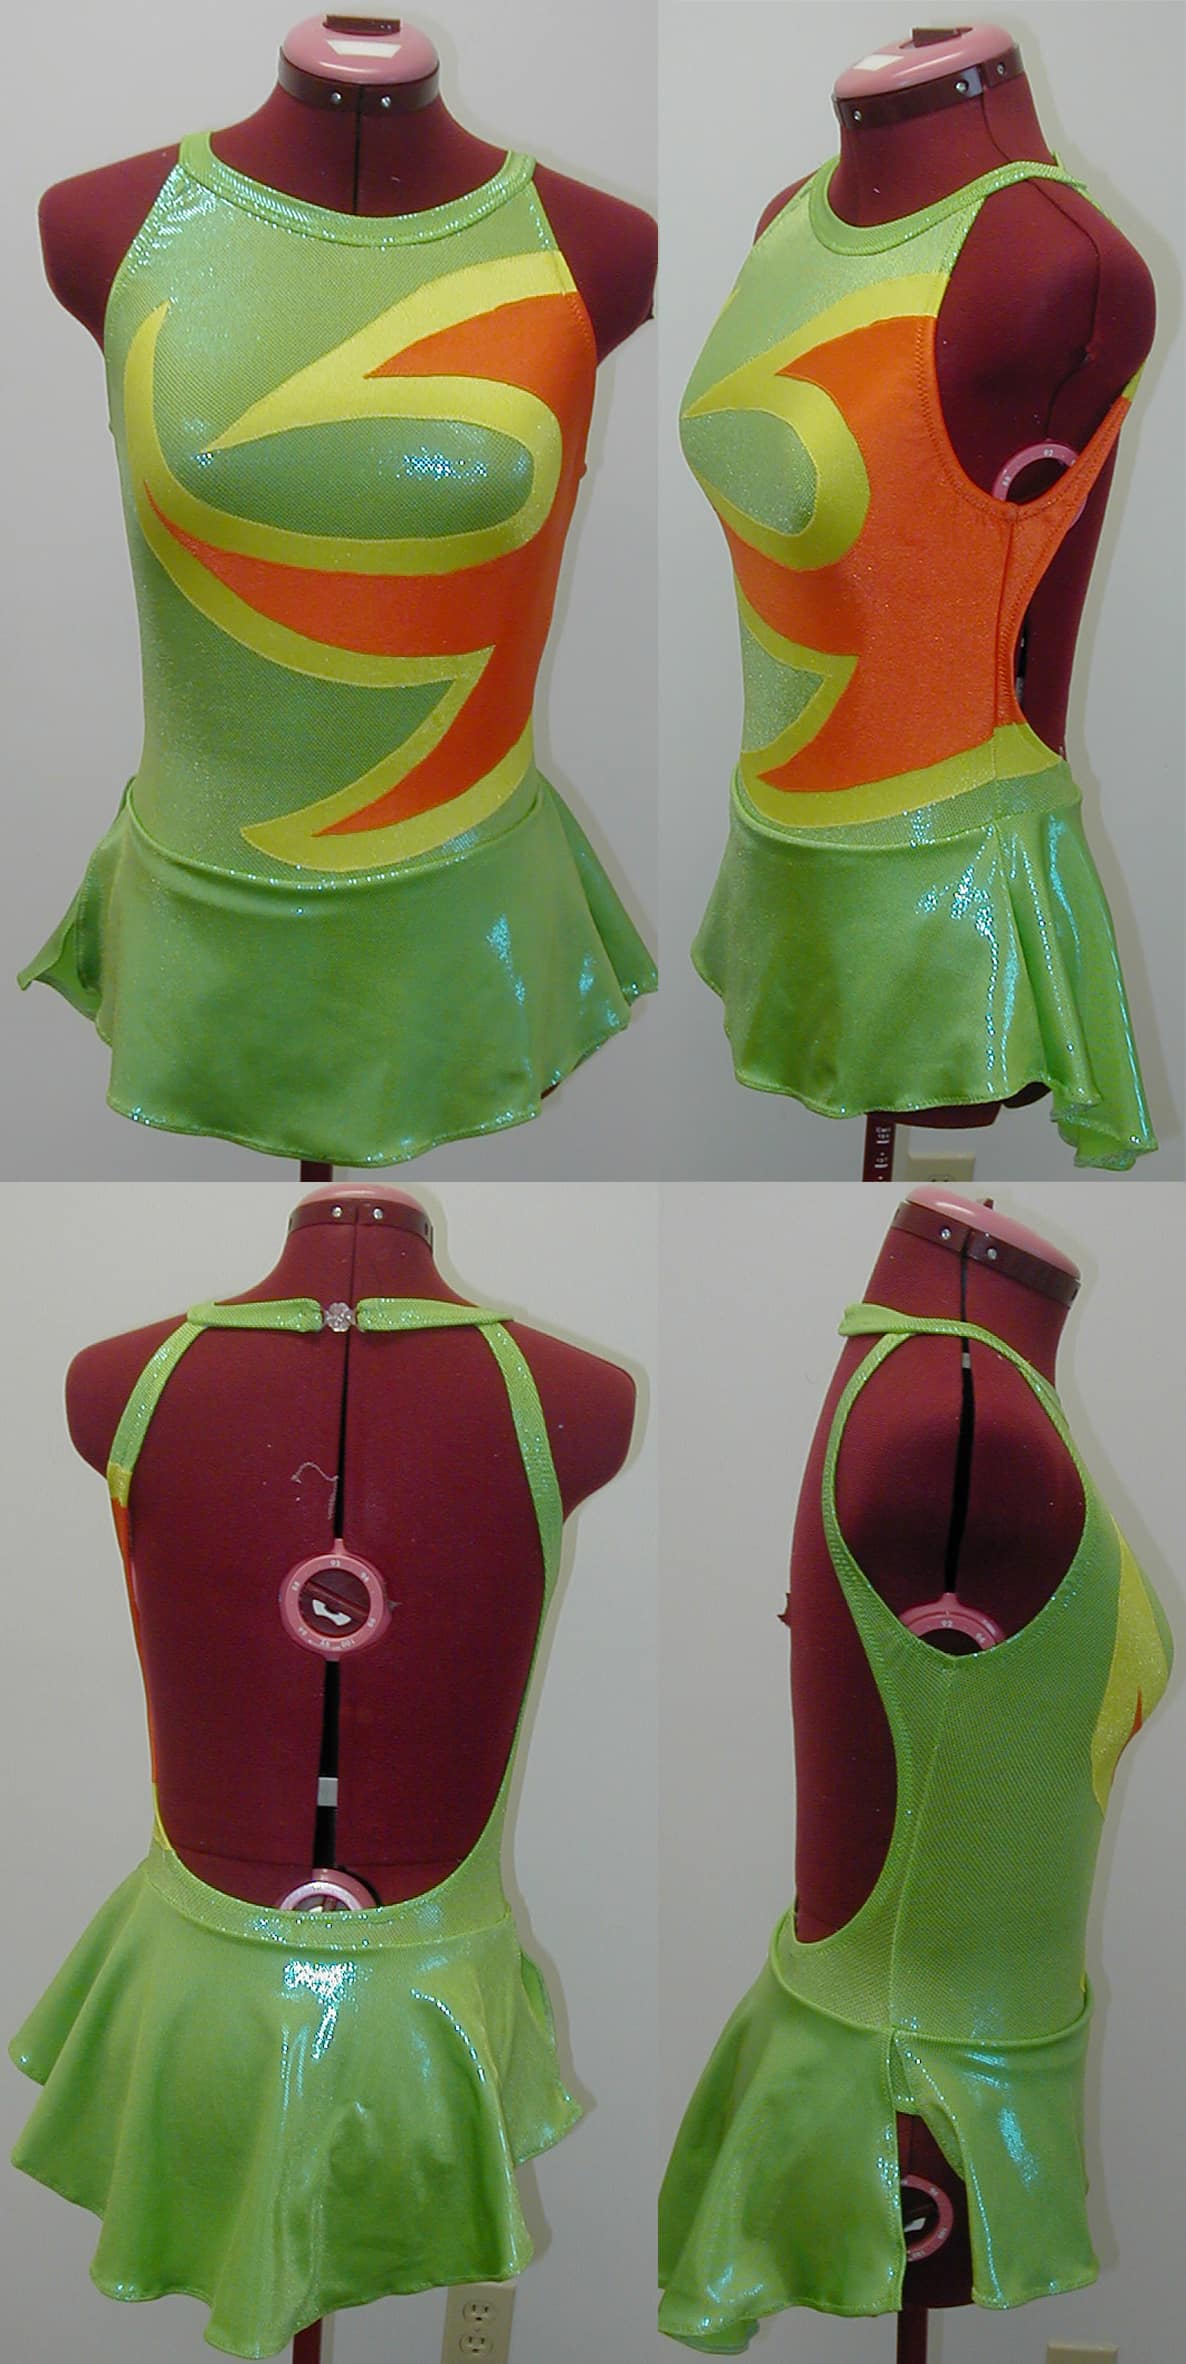 A 4 part image showing various views of a green, yellow, and orange figure skating dress.